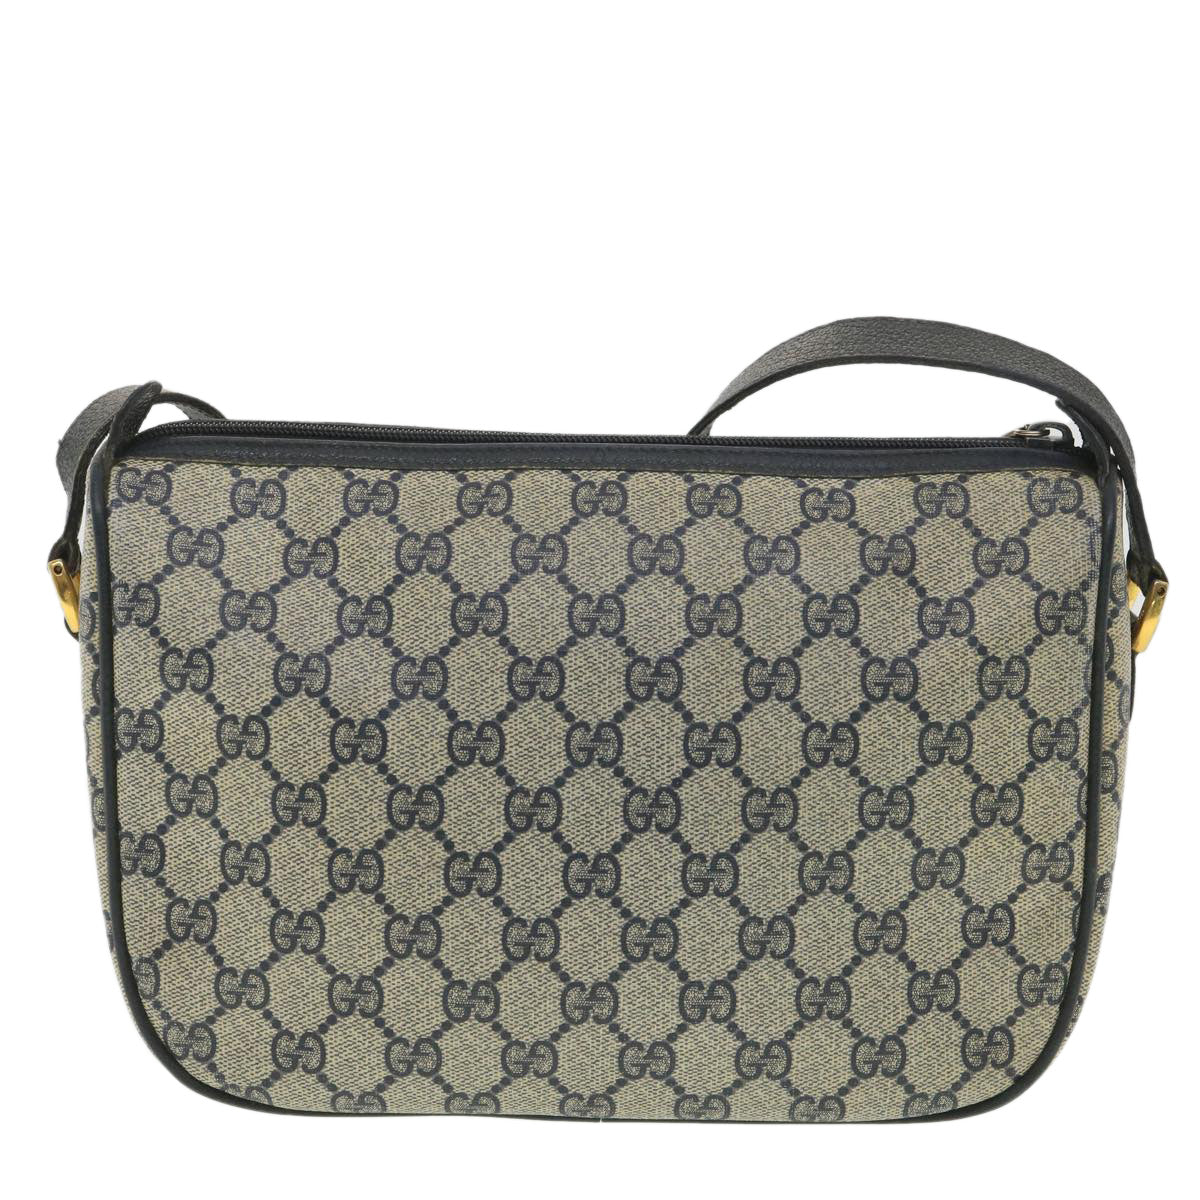 GUCCI GG Canvas Shoulder Bag PVC Leather Gray Navy 001 115 6106 Auth 38113 - 0